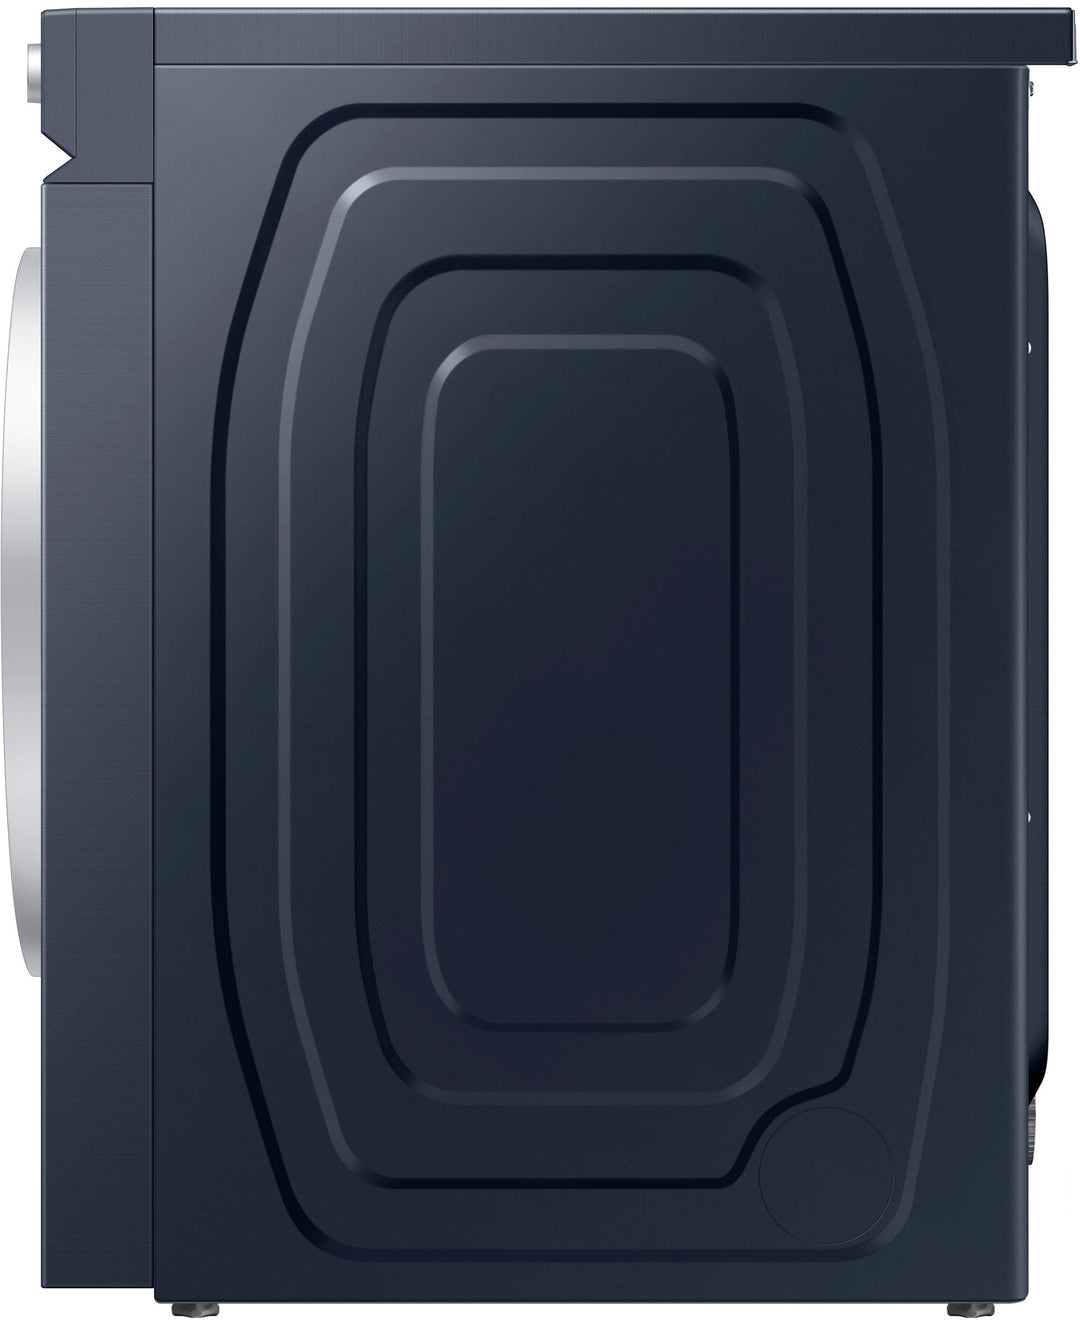 Samsung - Bespoke 7.6 cu. ft. Ultra Capacity Electric Dryer with AI Optimal Dry and Super Speed Dry - Brushed navy_6